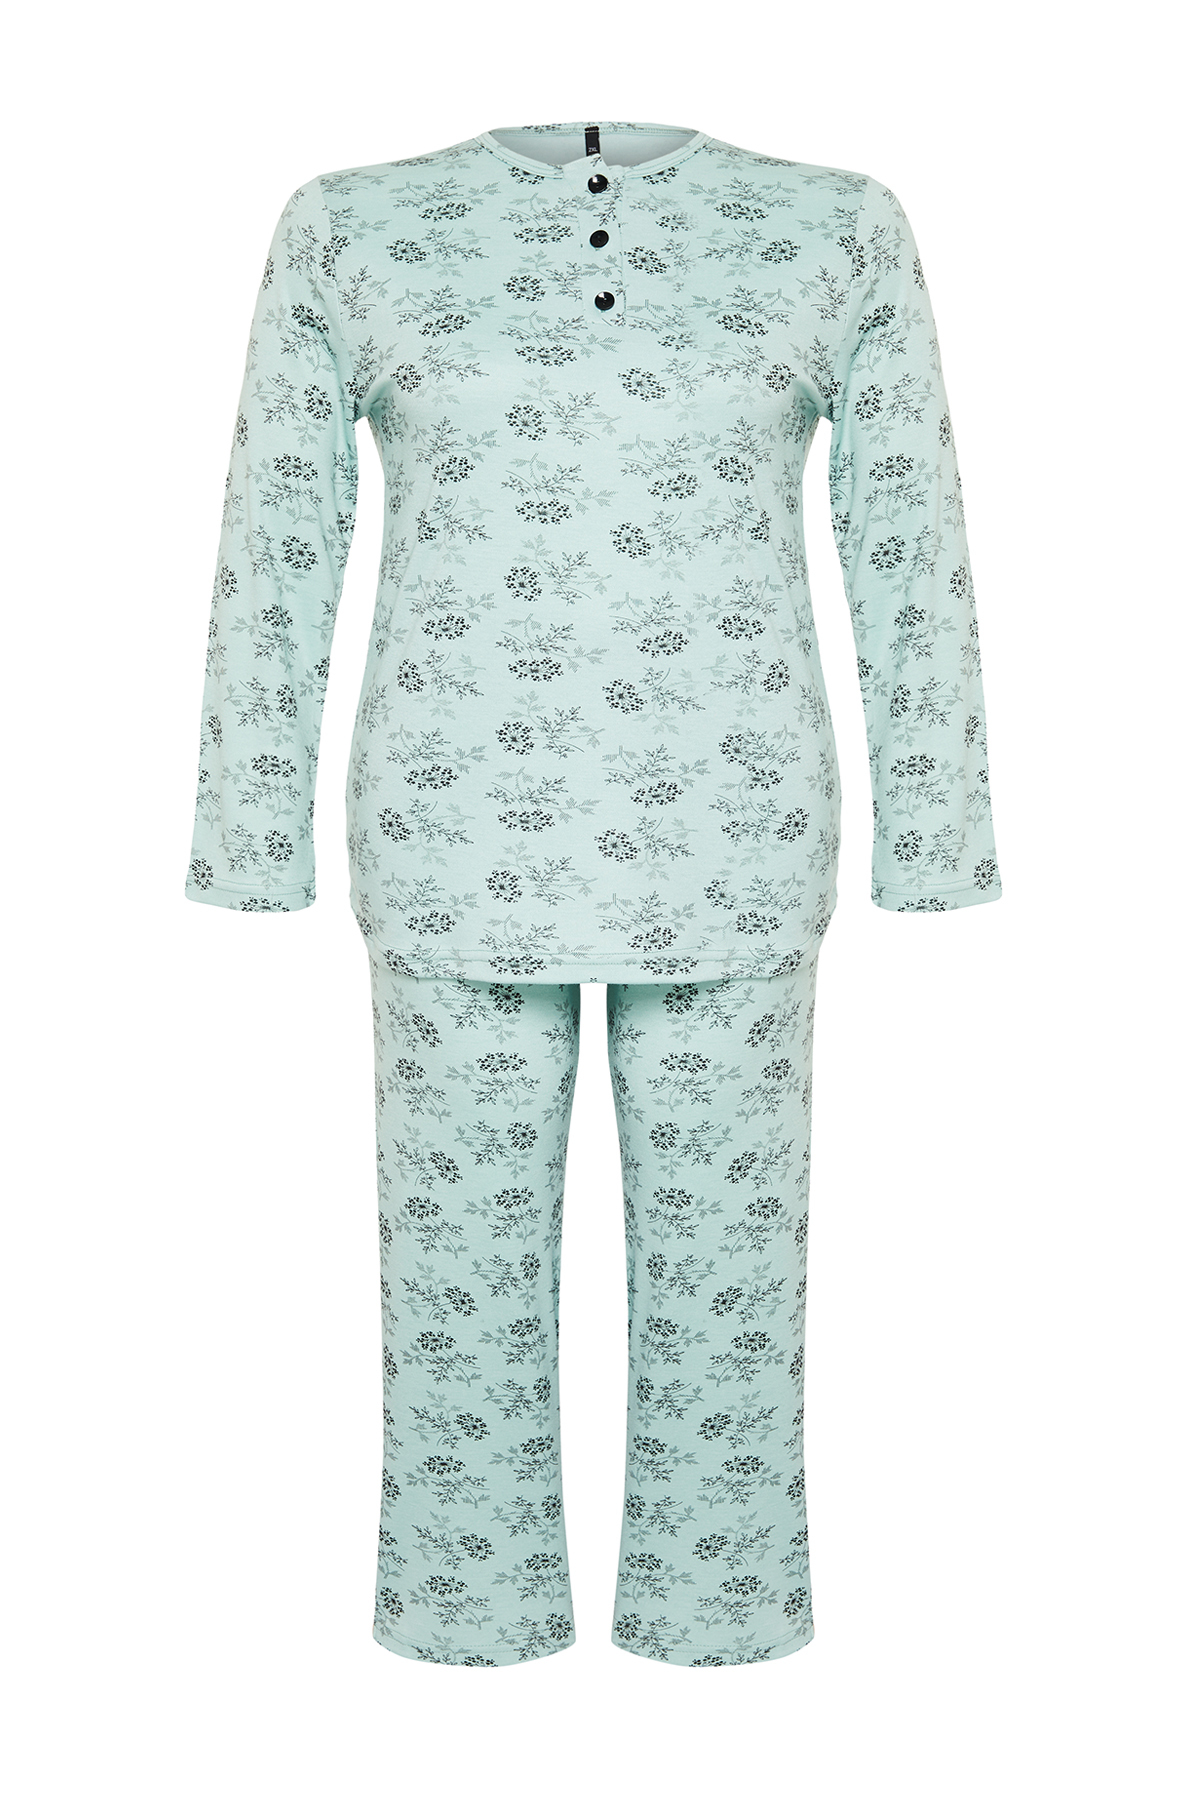 Trendyol Curve Mint Buttoned Floral Pattern Knitted Pajamas Set